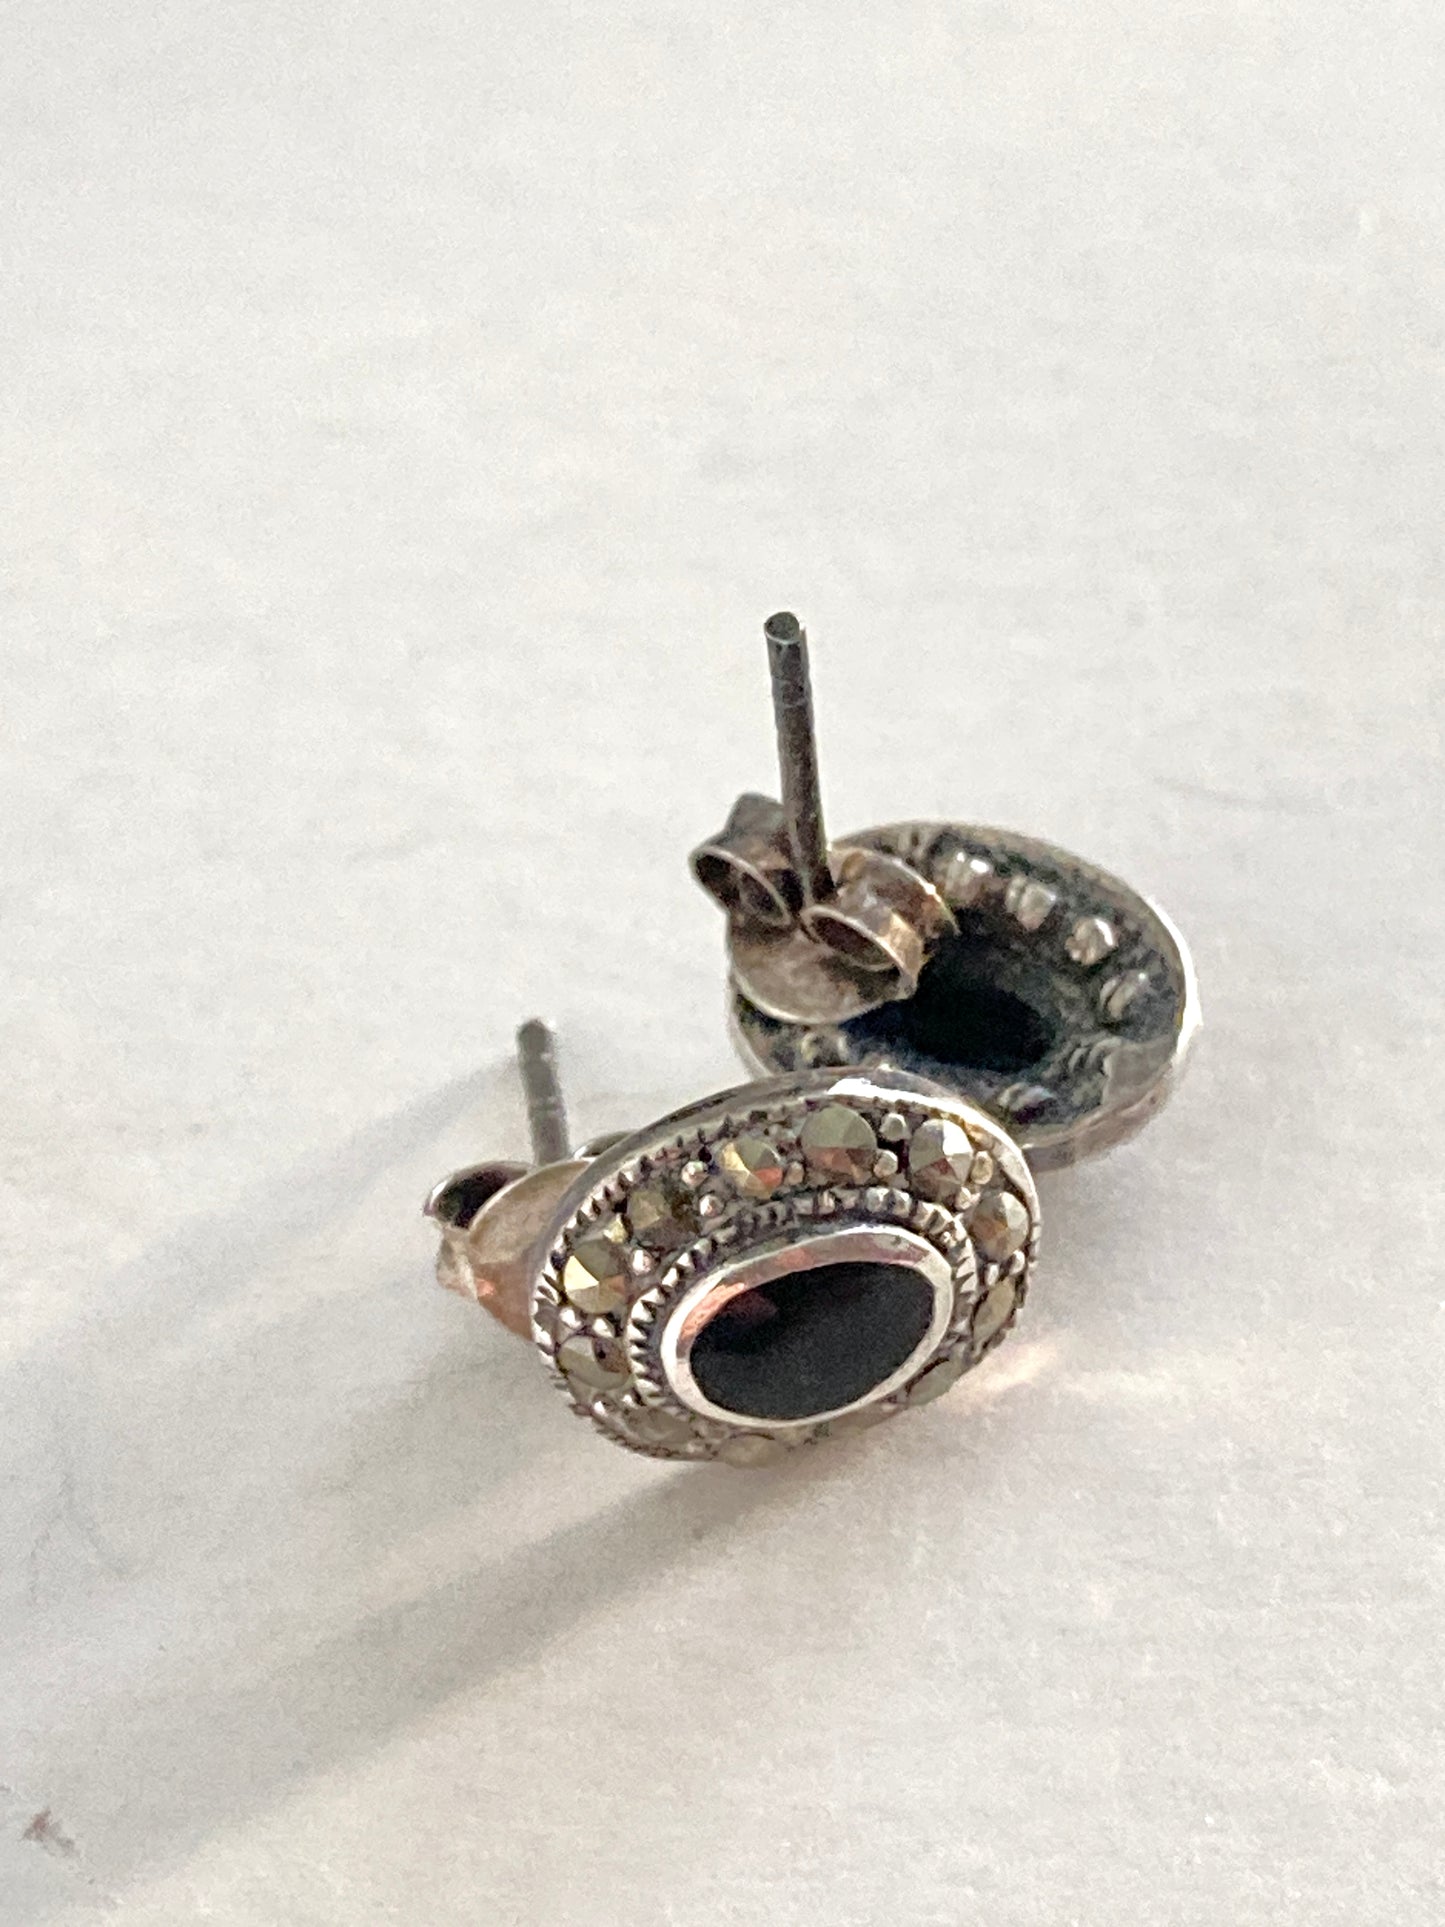 Tiny Sterling Onyx and Marcasite Earrings